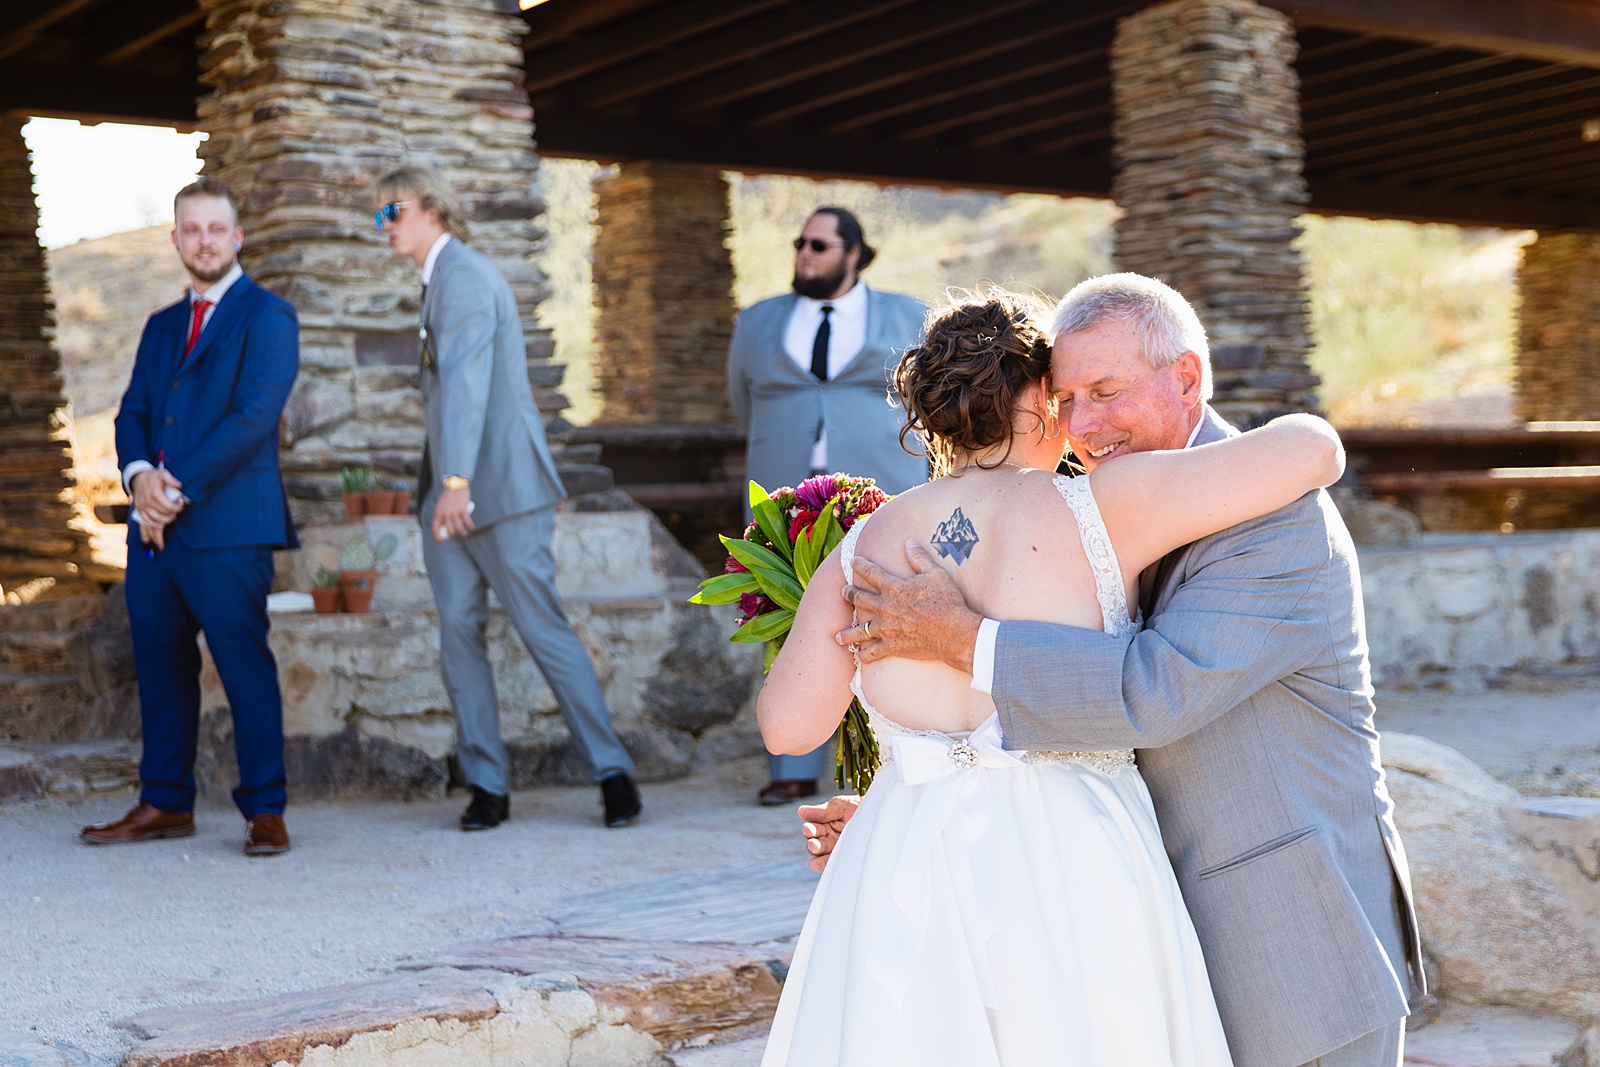 Bride walking down aisle during intimate desert wedding ceremony by Phoenix wedding photographer Juniper and Co Photography.